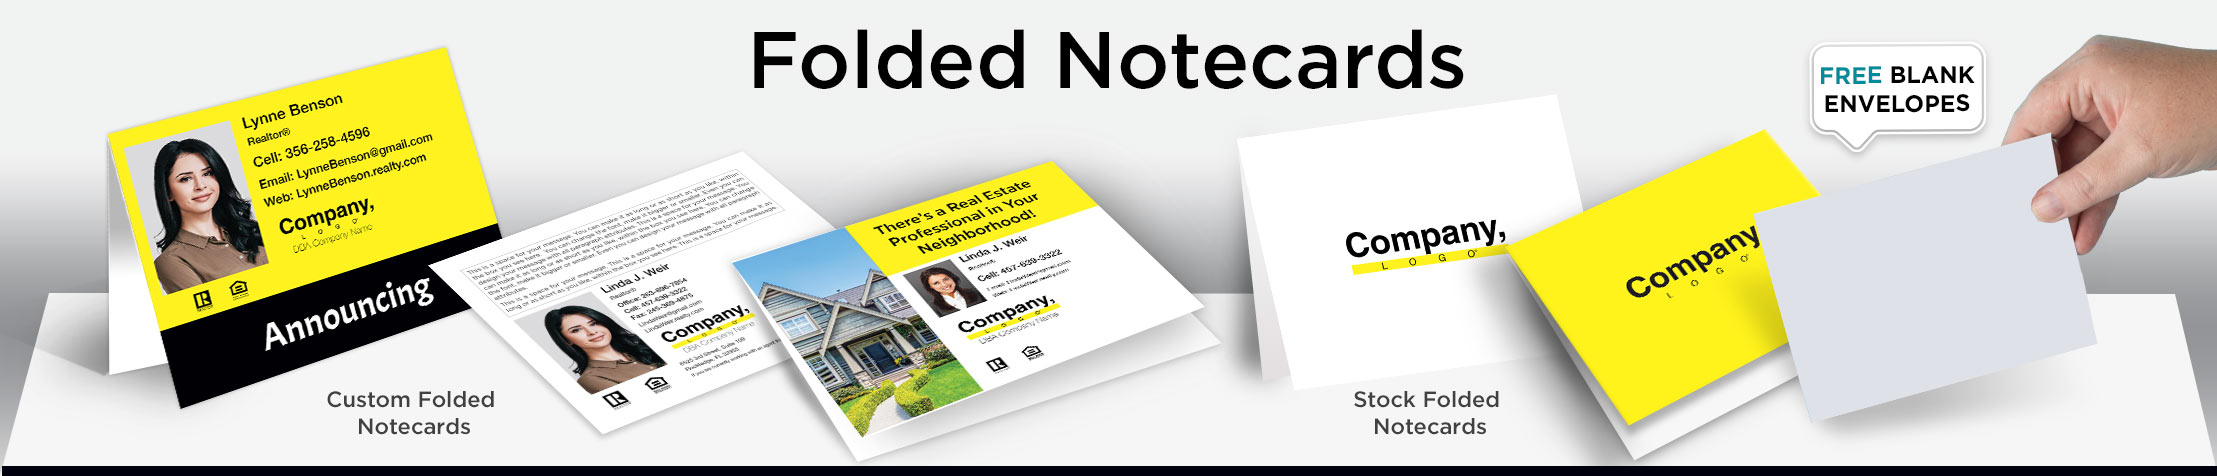 Weichertr Real Estate Postcards -  postcard templates and direct mail postcard mailing services | BestPrintBuy.com